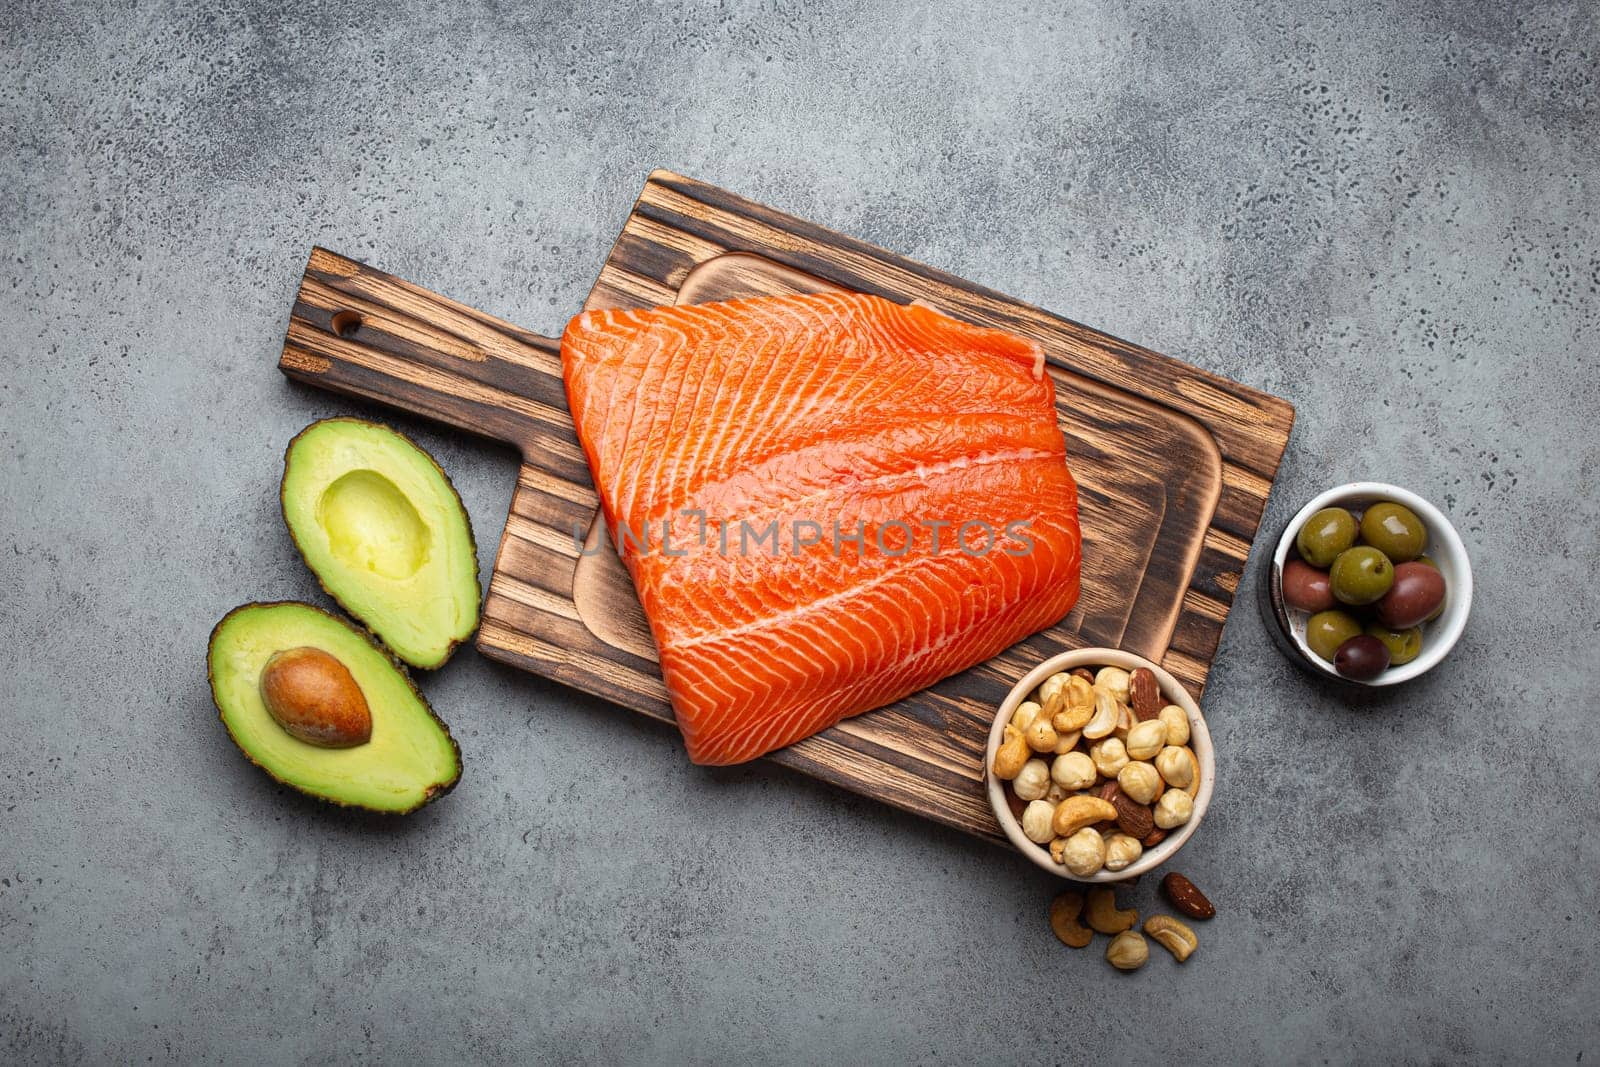 Food sources of healthy unsaturated fat: fresh raw salmon fillet, avocado, olives, nuts on cutting board, rustic stone background top view. Omega 3 and oil products, healthy nutrition and keto diet by its_al_dente